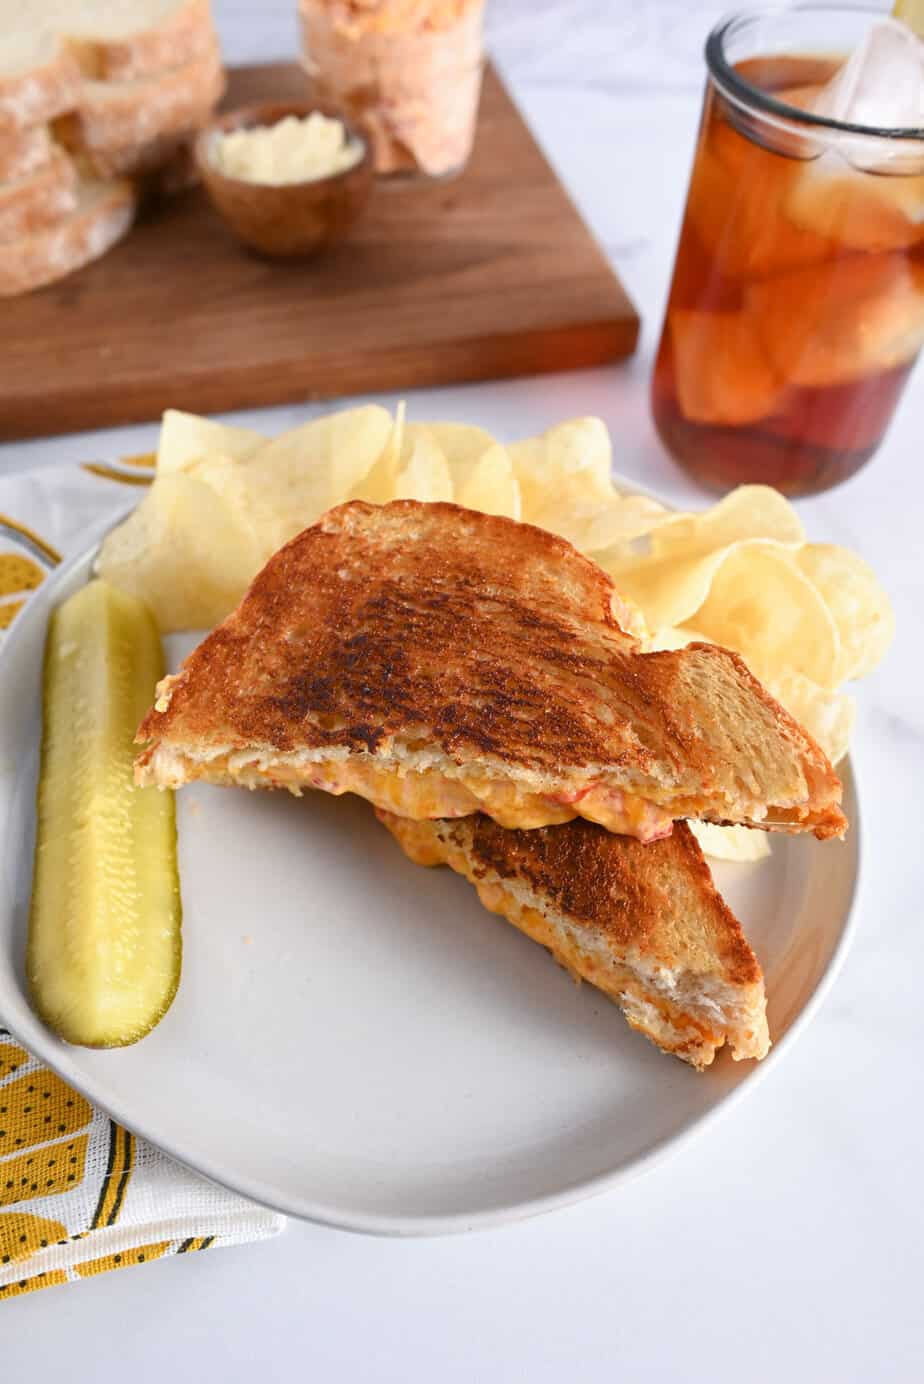 Two halves of a grilled pimento cheese sandwich arranged on a white plate with potato chips and a pickle spear.